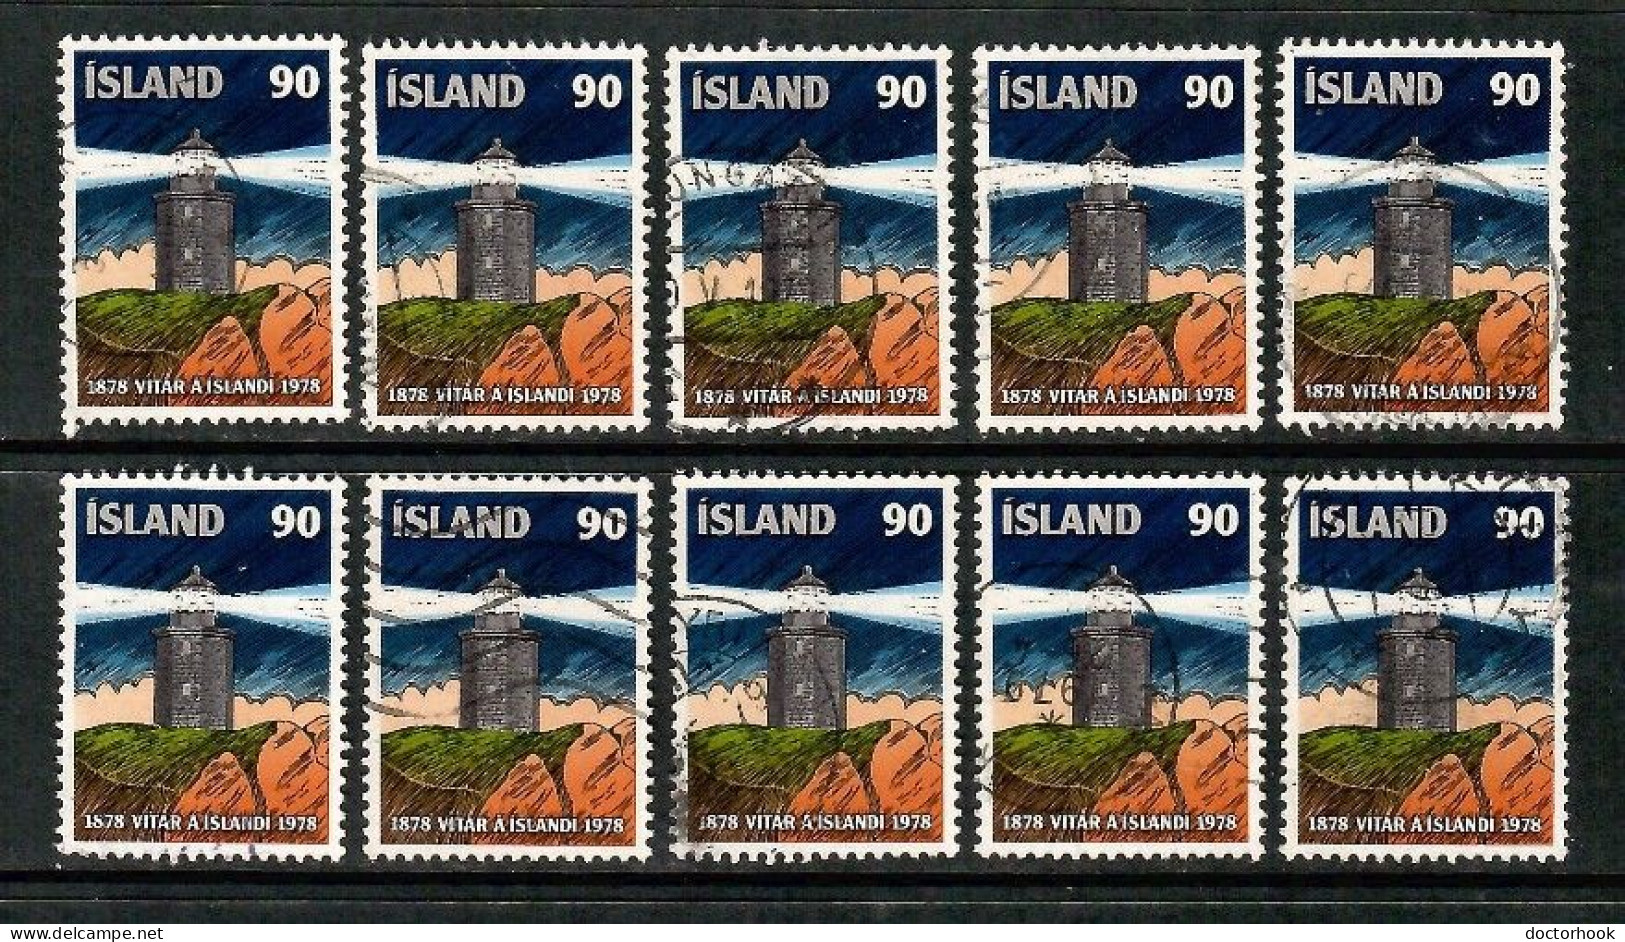 ICELAND   Scott # 574 USED WHOLESALE LOT OF 10 (CONDITION AS PER SCAN) (WH-626) - Lots & Serien